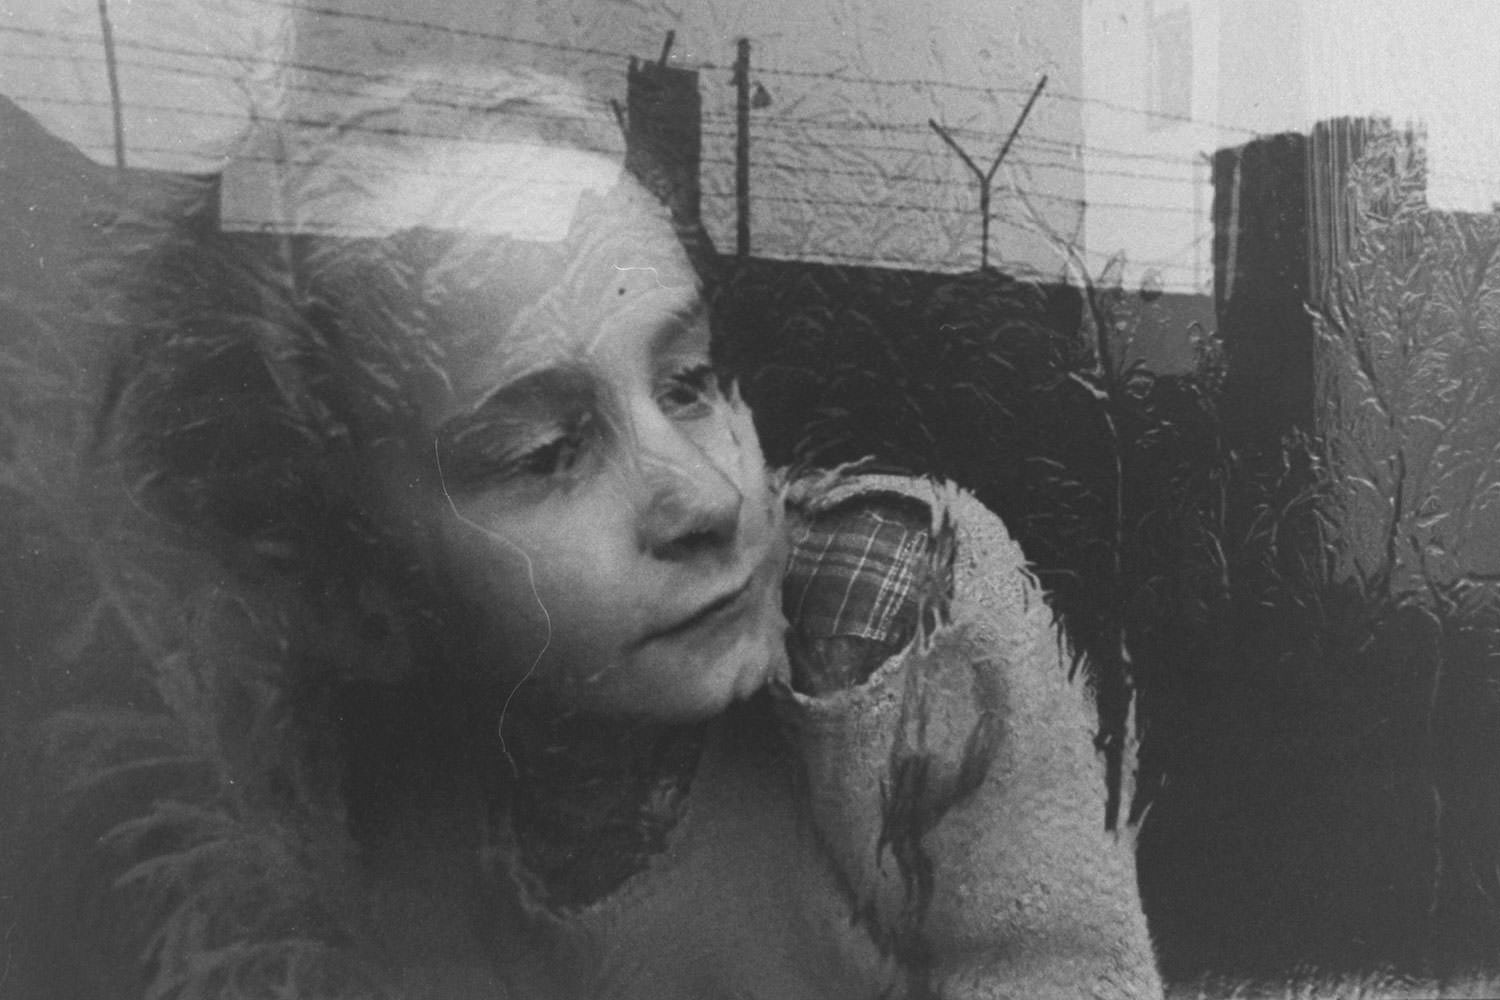 A girl looks at the Berlin Wall through a frosty window which reflects the Wall's silhouetted barbed wire in December 1962.